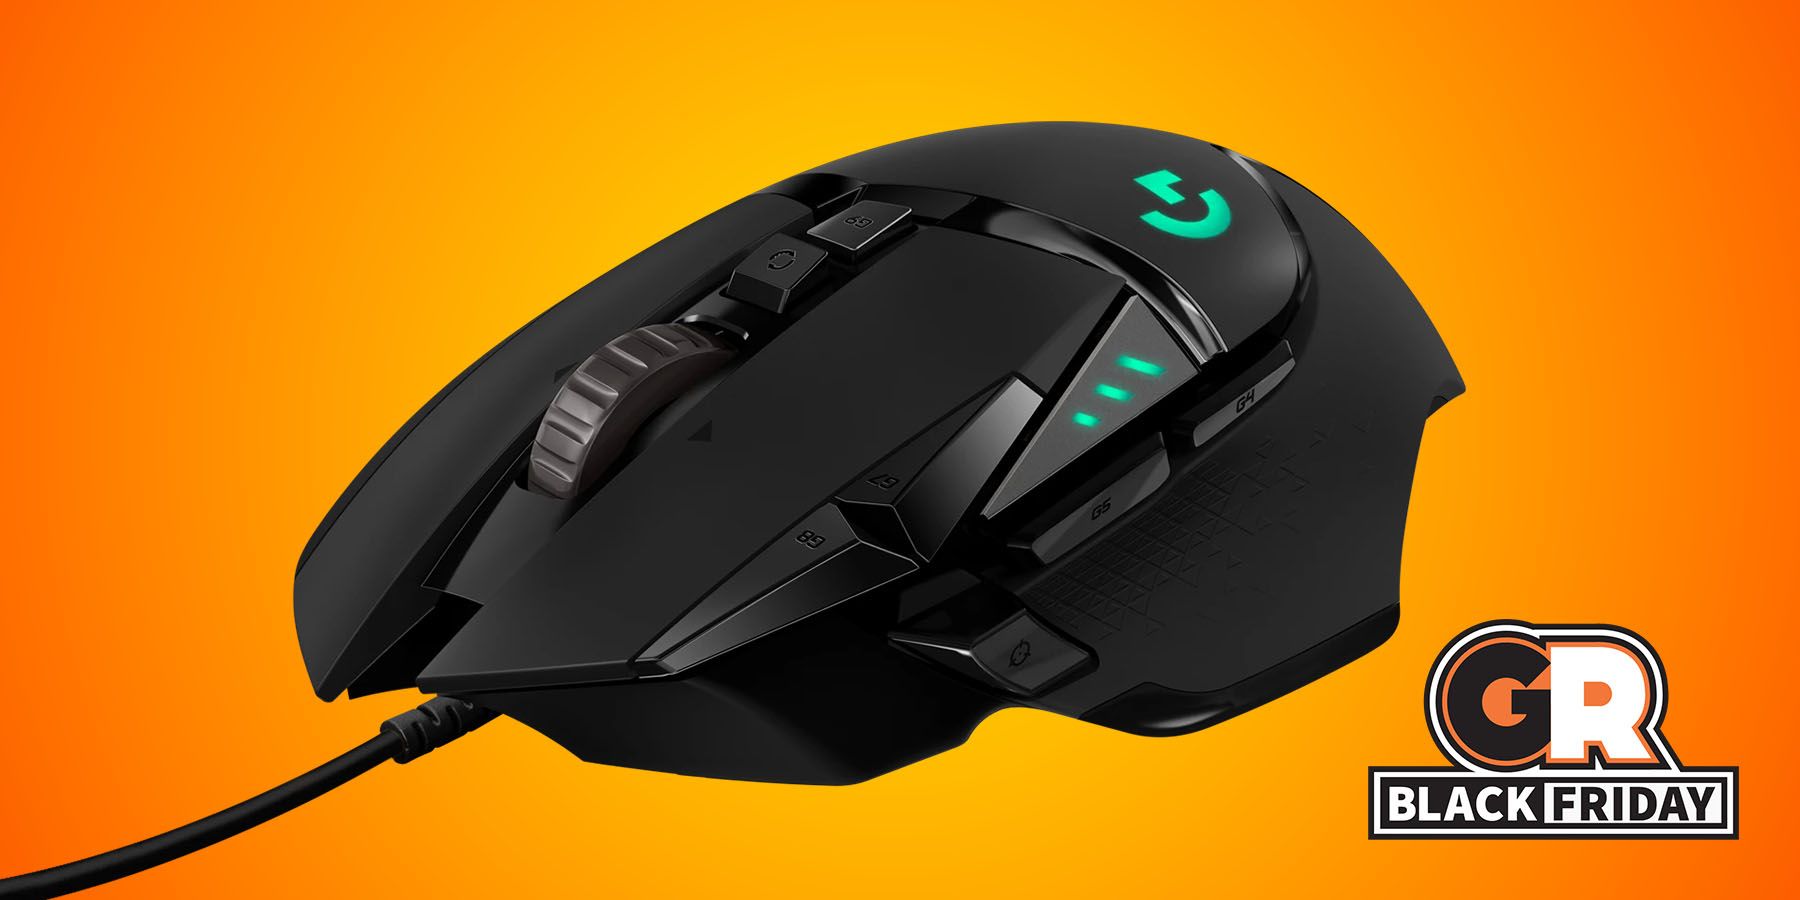 Amazon Early Black Friday Deal: Save $45 on Logitech HERO High Performance Mouse